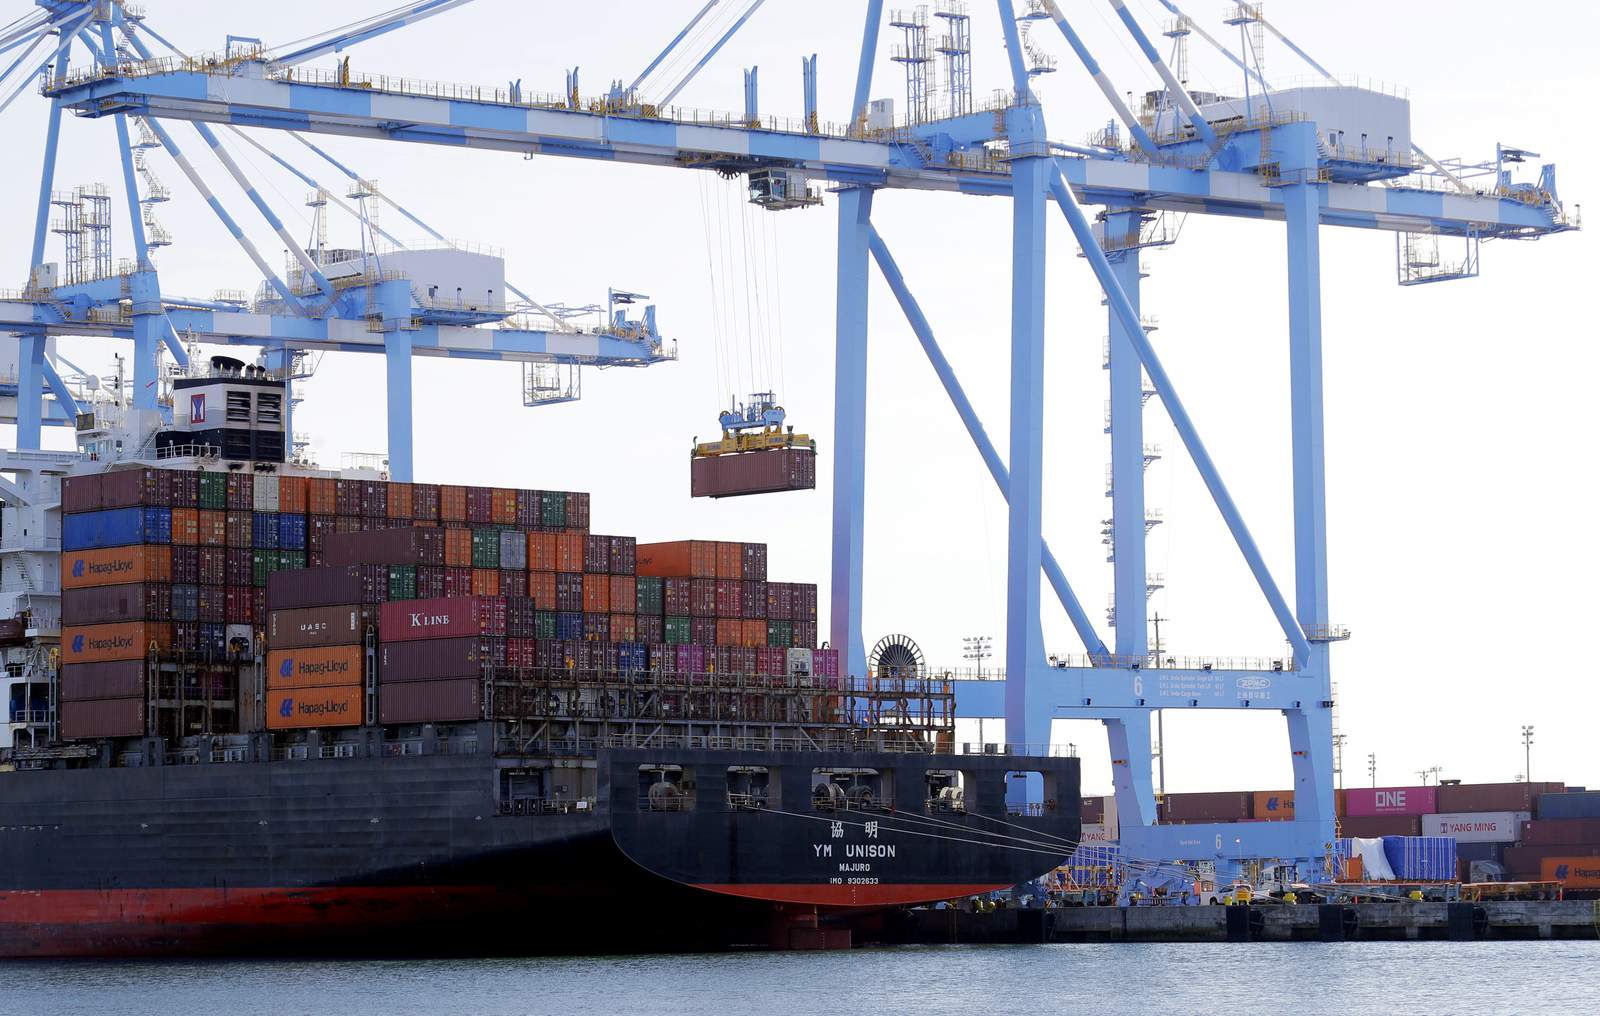 US trade deficit surges in July to highest in 12 years